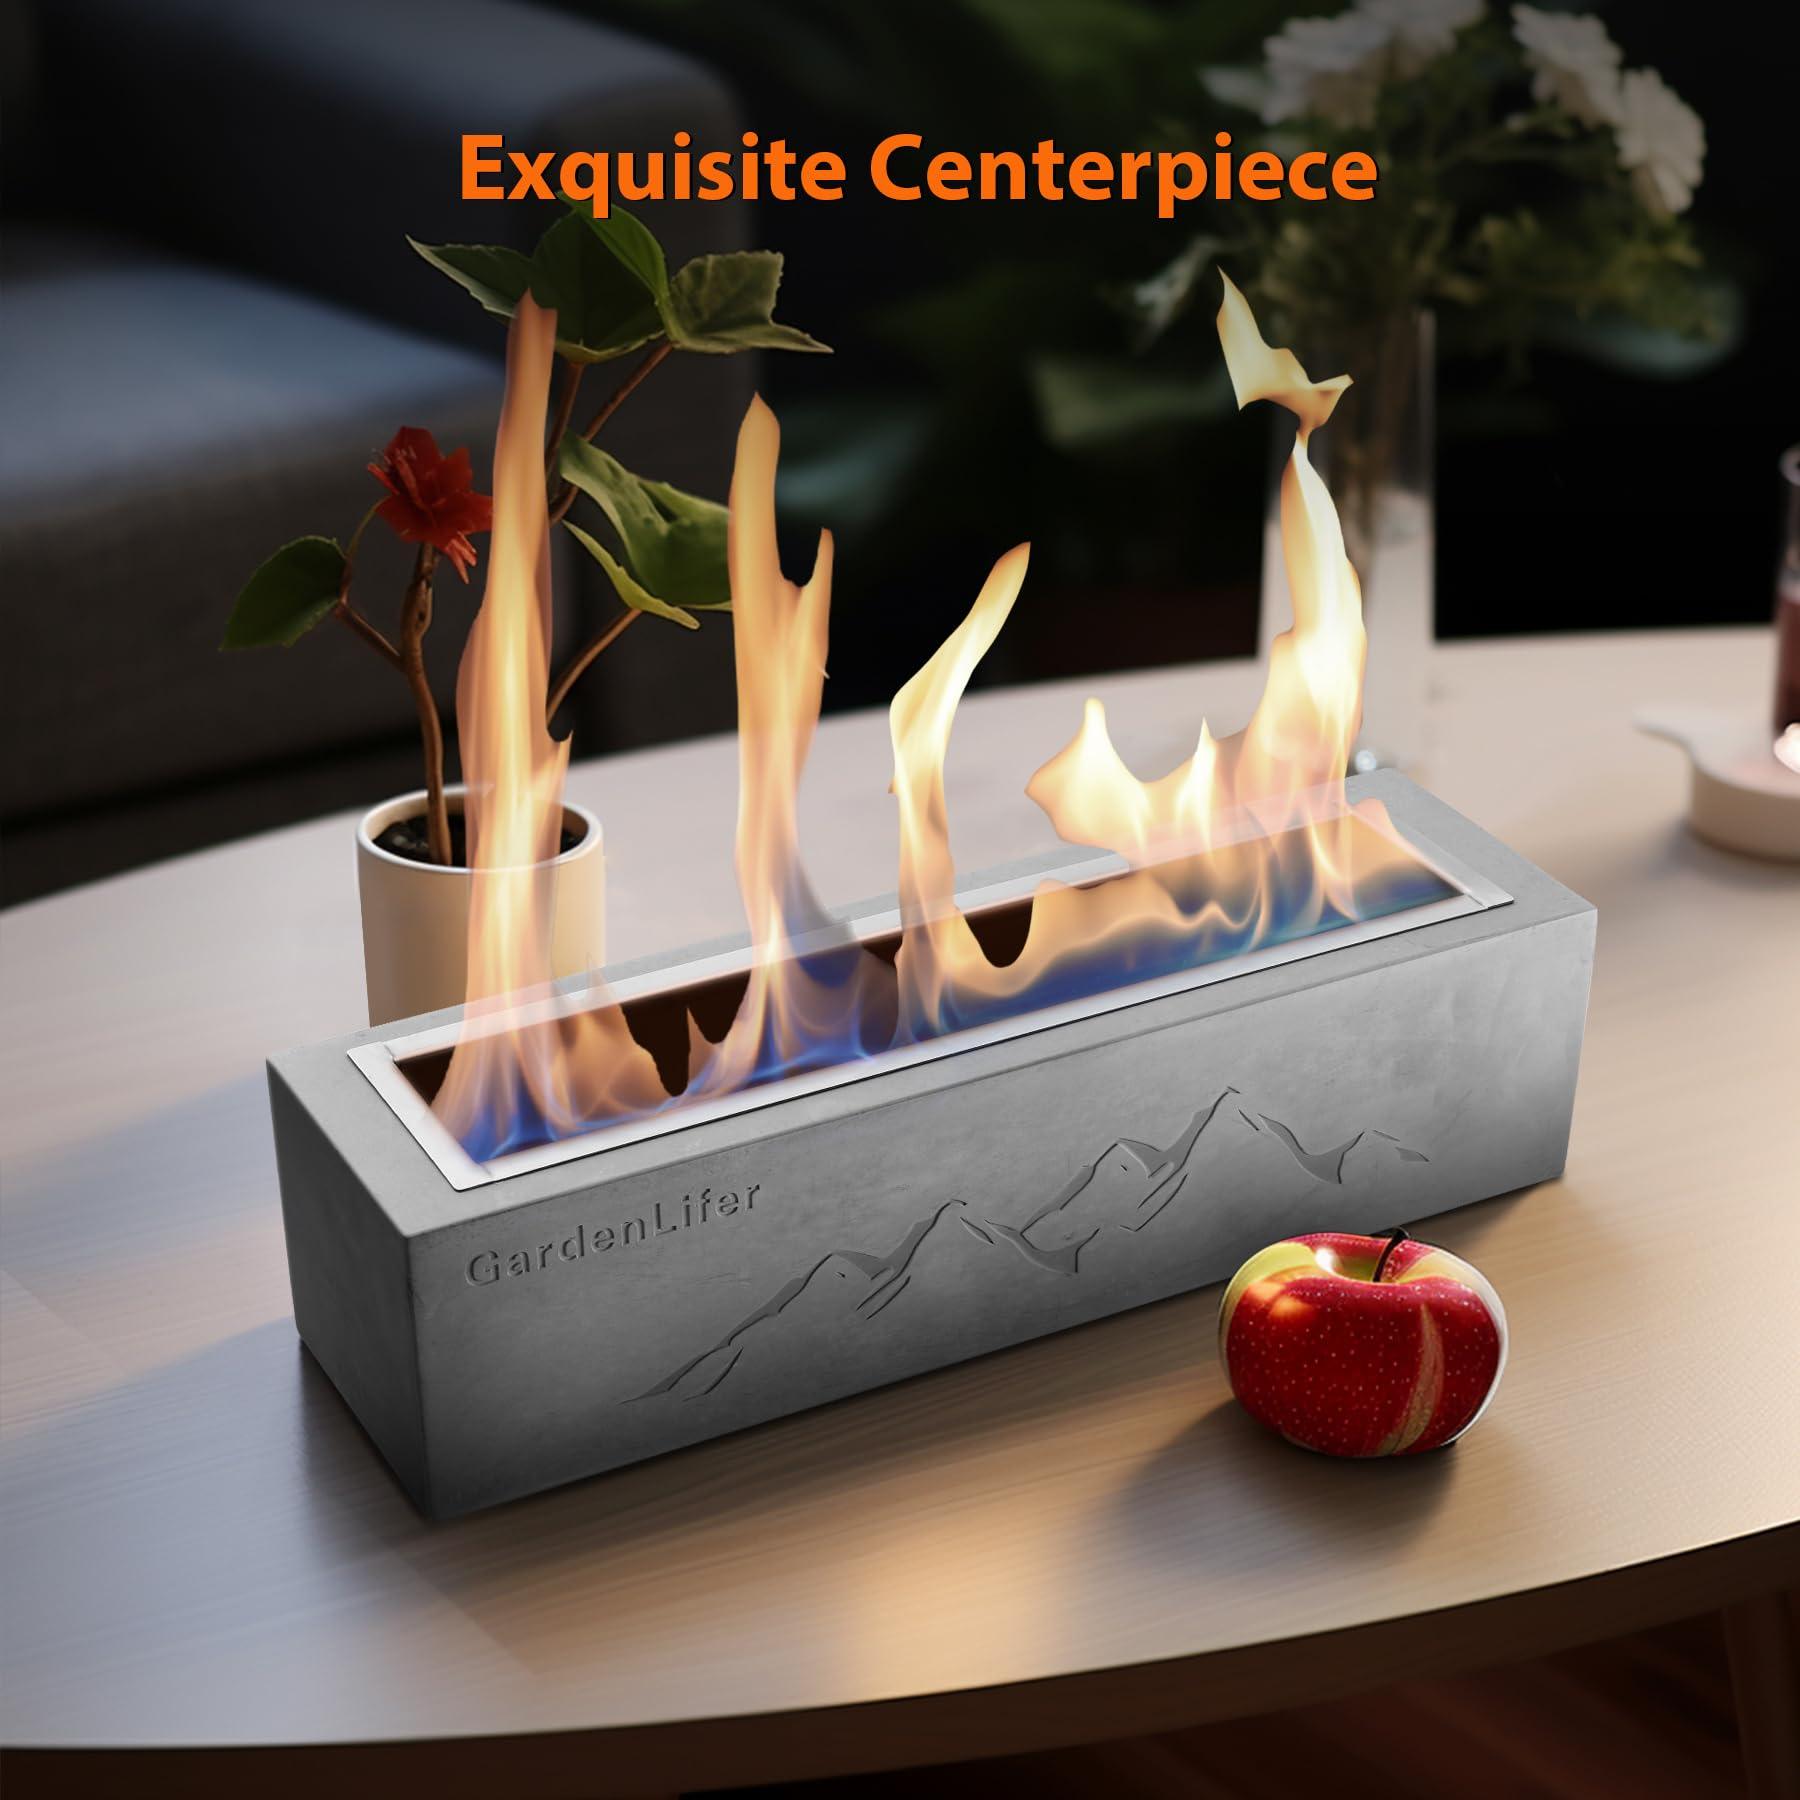 GardenLifer Tabletop Fire Pit 15 Inches L Portable Mini Fireplace Smokeless Bioethanol Fuel Concrete Fire Bowl Stove with 2 Extending Roasting Forks for Indoor Outdoor Smores Heat Decor - CookCave